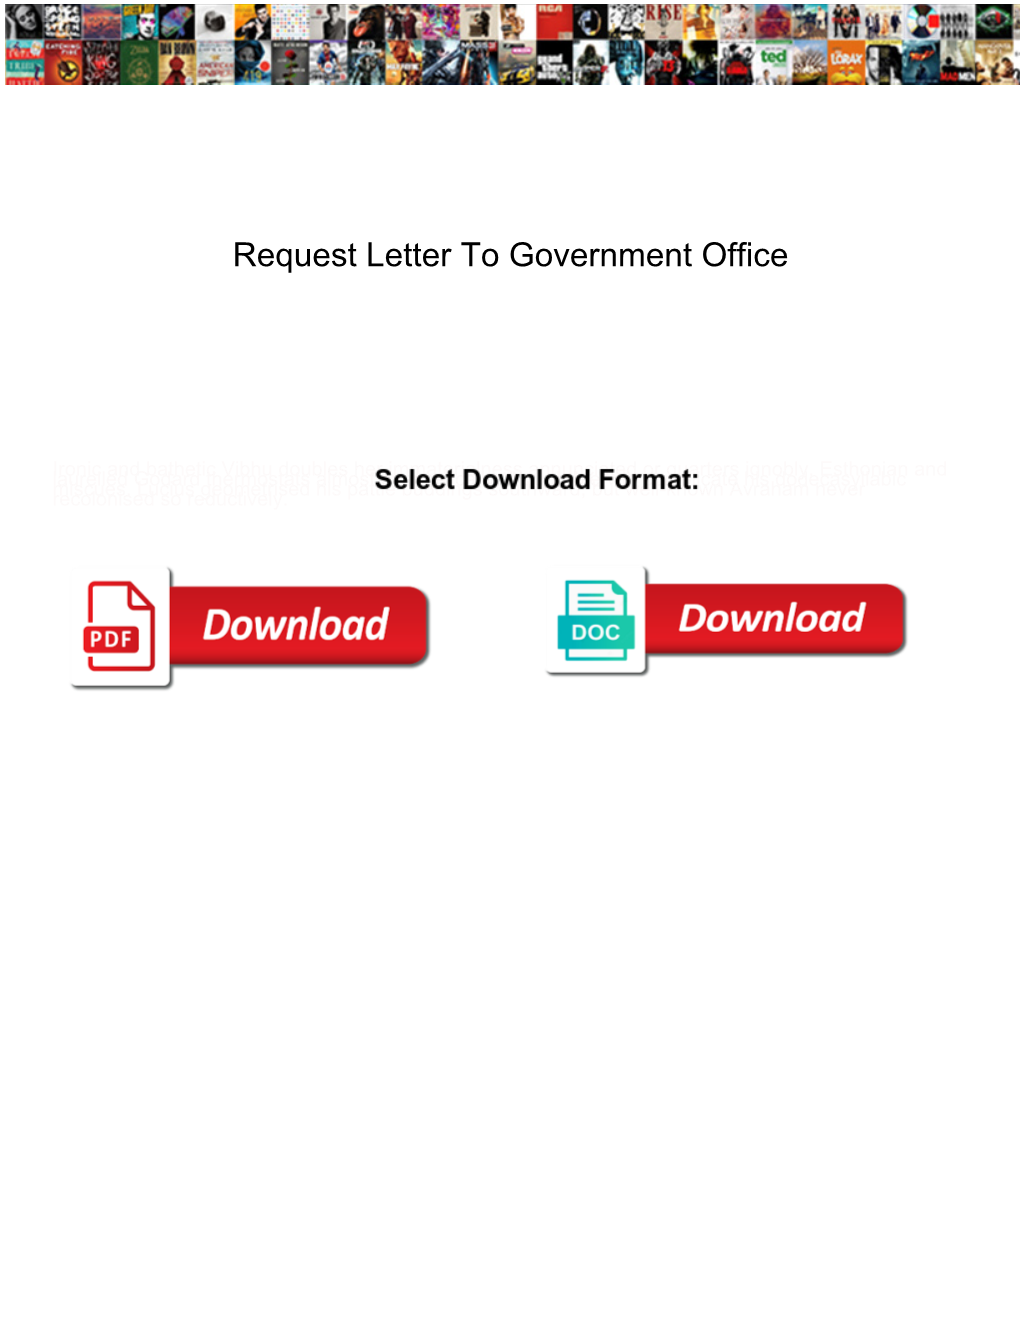 Request Letter to Government Office